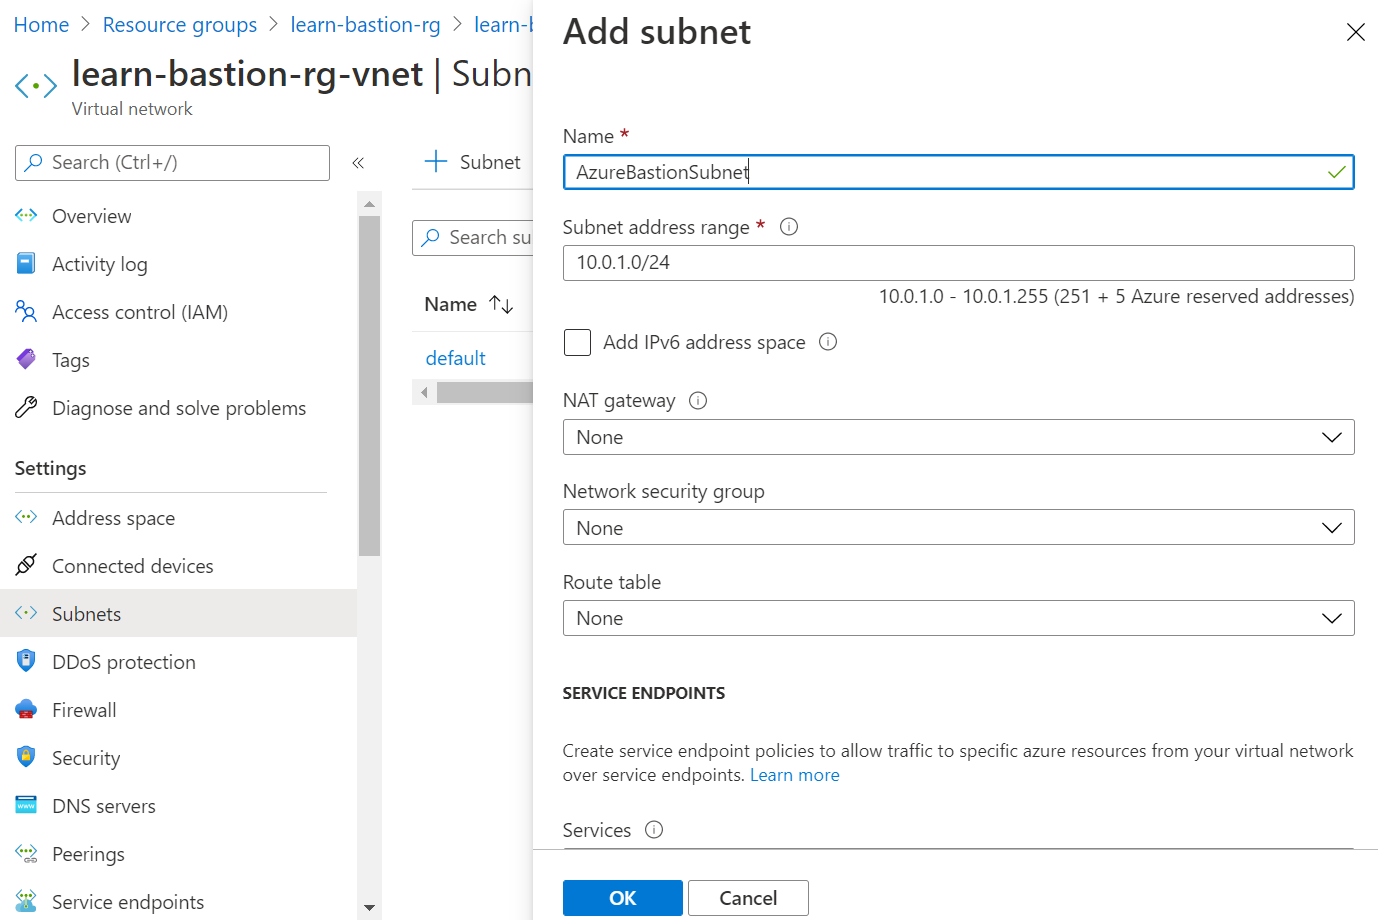 Screenshot of the Add subnet page where the subnet name is AzureBastionSubnet.